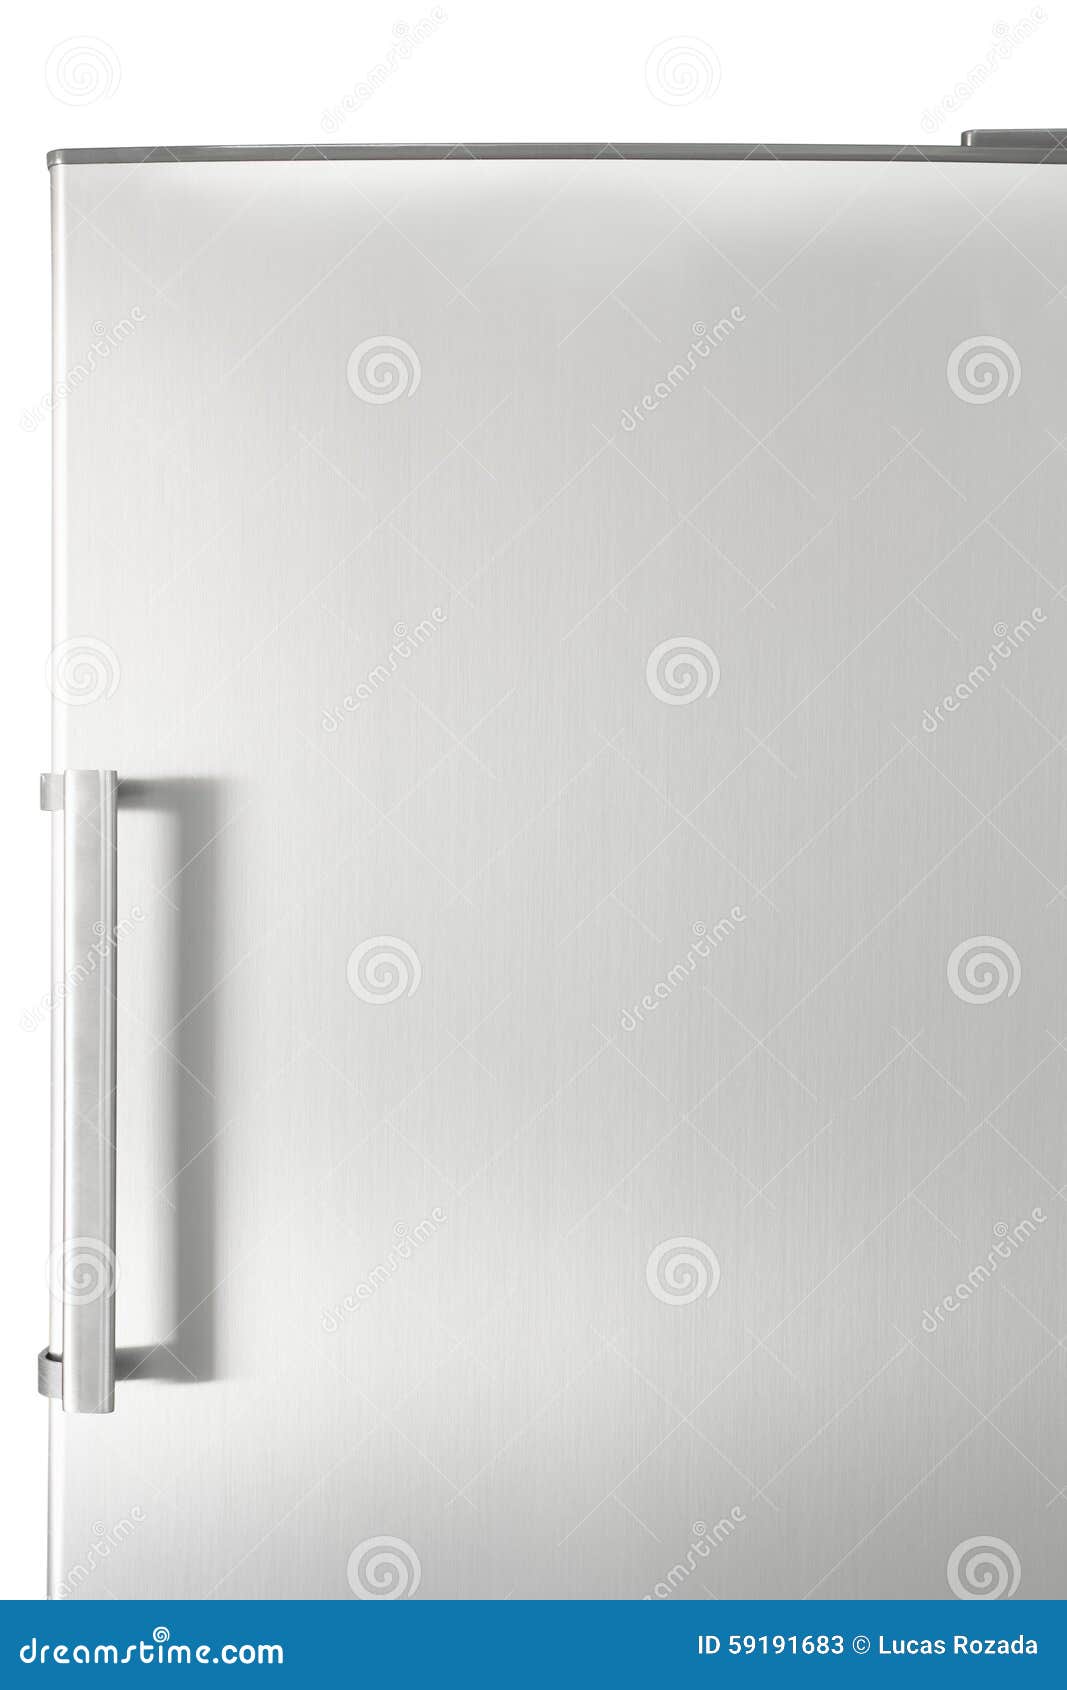 silver fridge door with handle, with free space for text